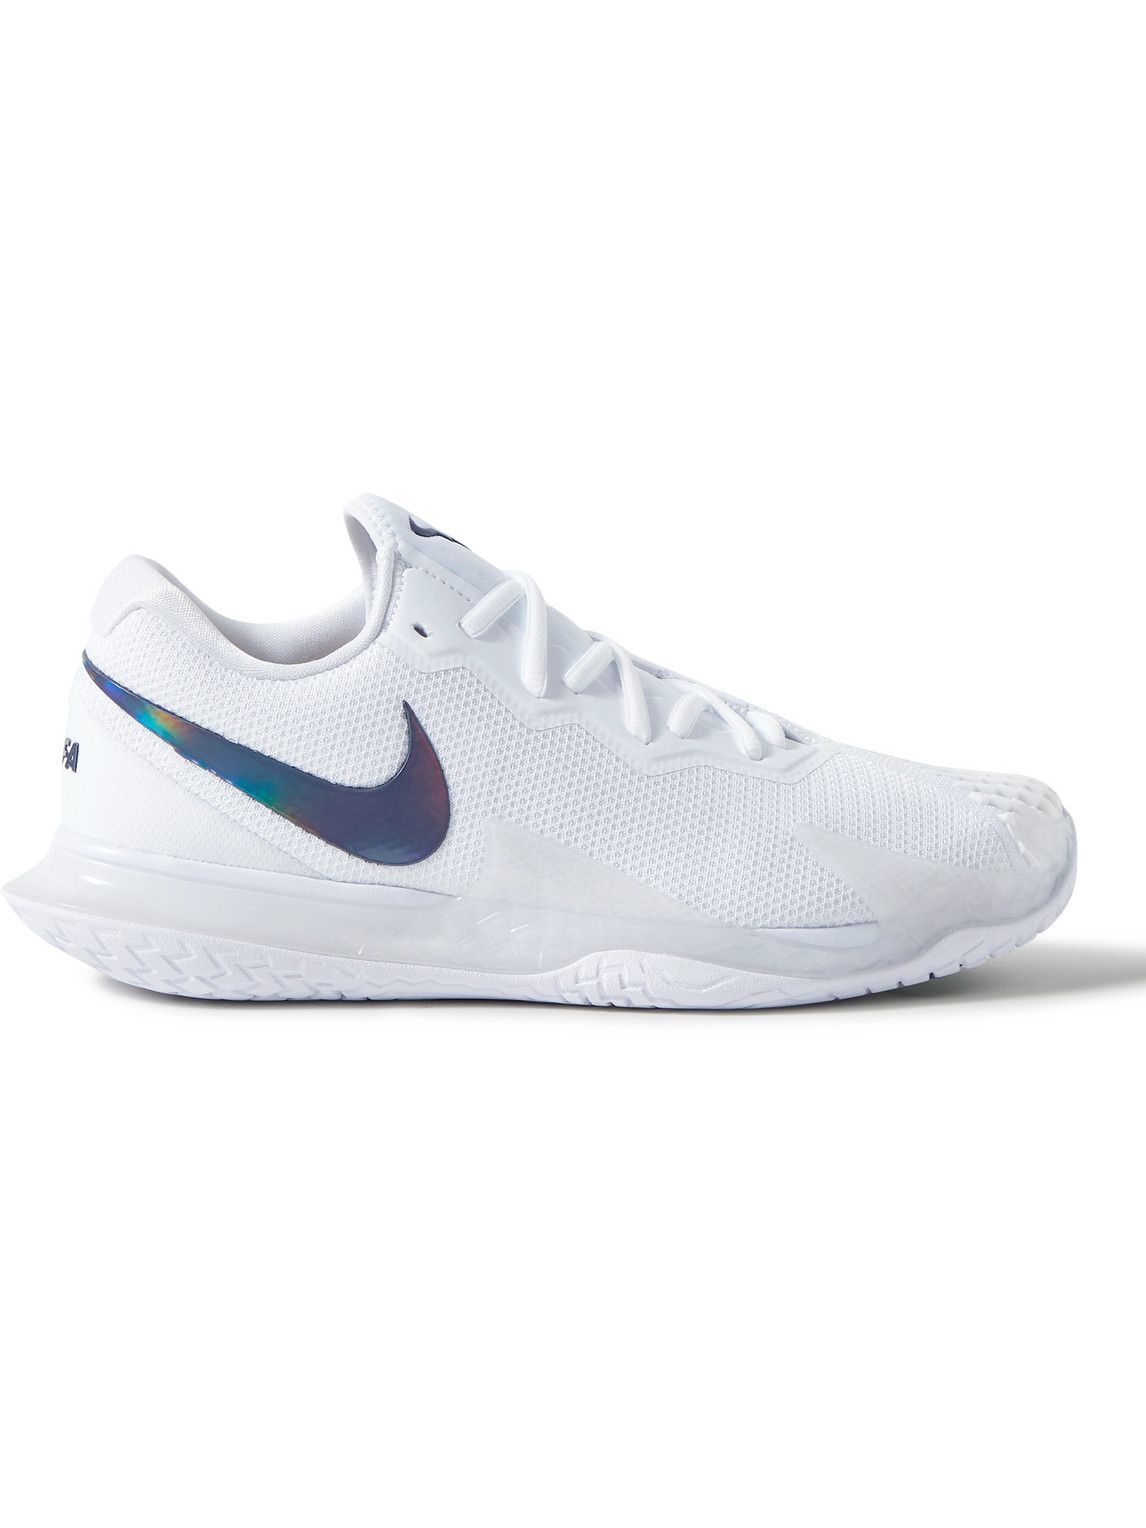 Nike Tennis - NikeCourt Air Zoom Vapor Cage 4 Rubber and Mesh